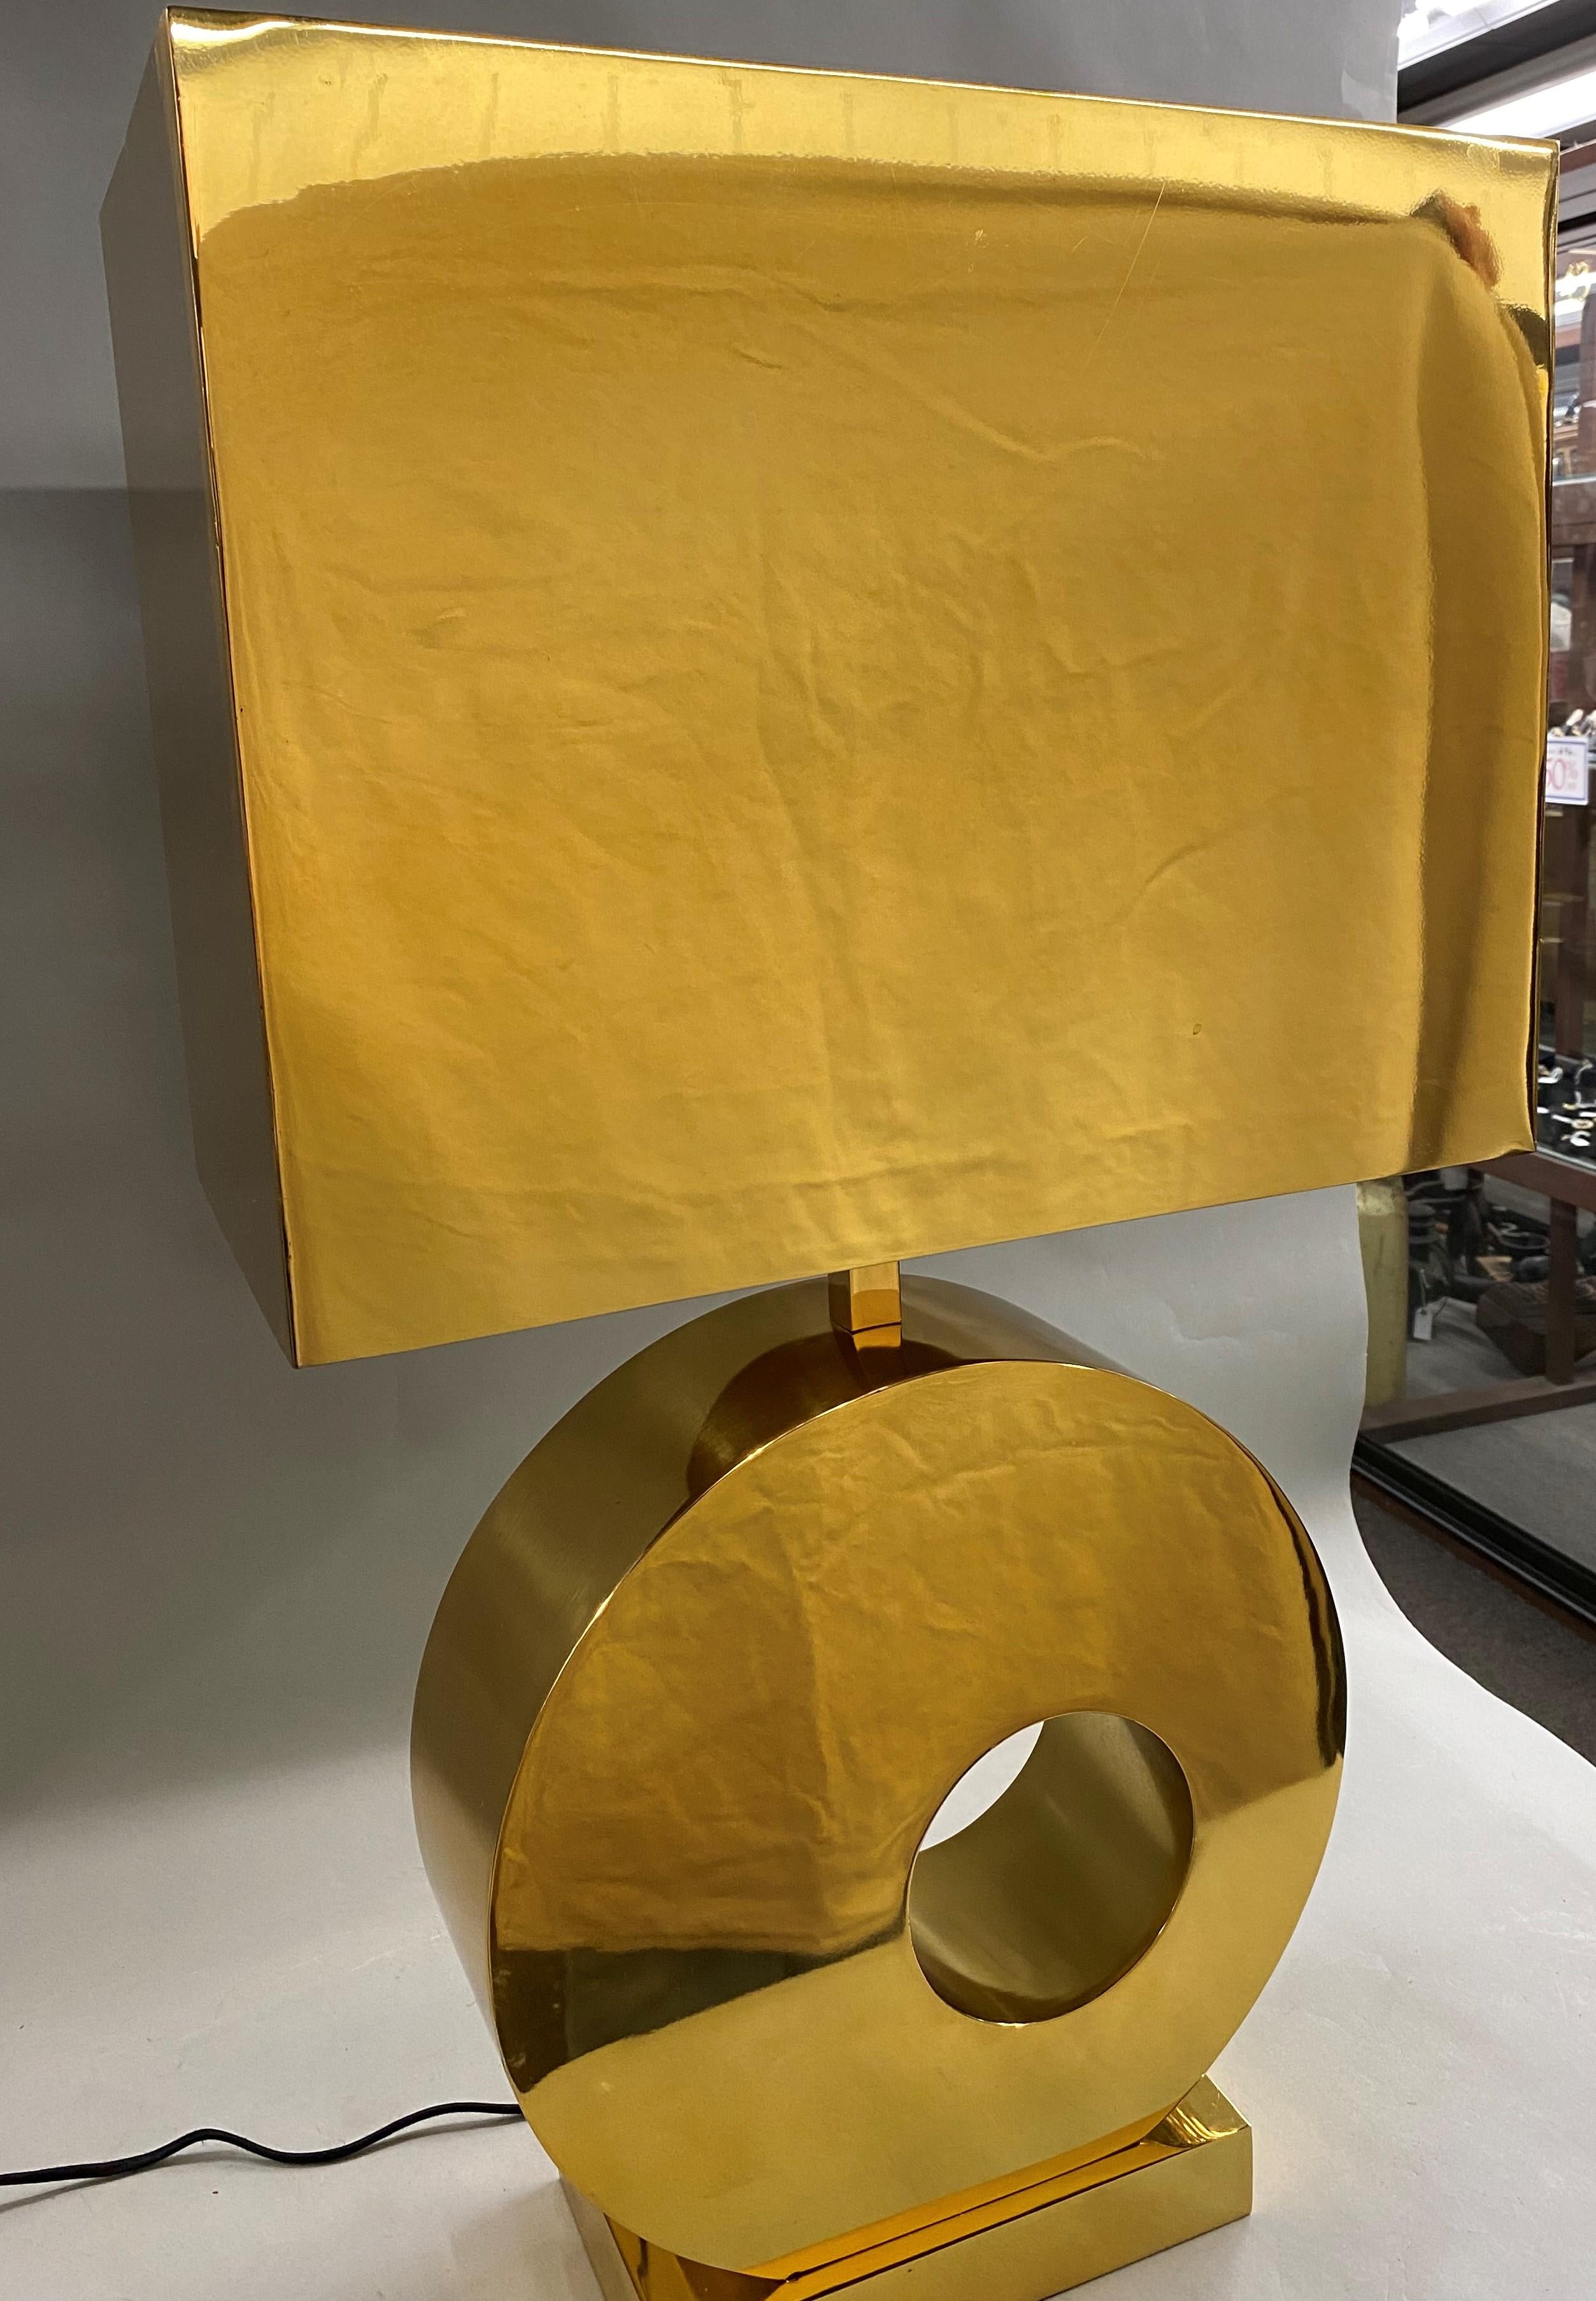 A fine designer modernist heavy bronze or brass two light table lamp with rectangular shade and round donut form body with rectangular felt lined base. This vintage lamp dates to the second half of the 20th century and is in very good working